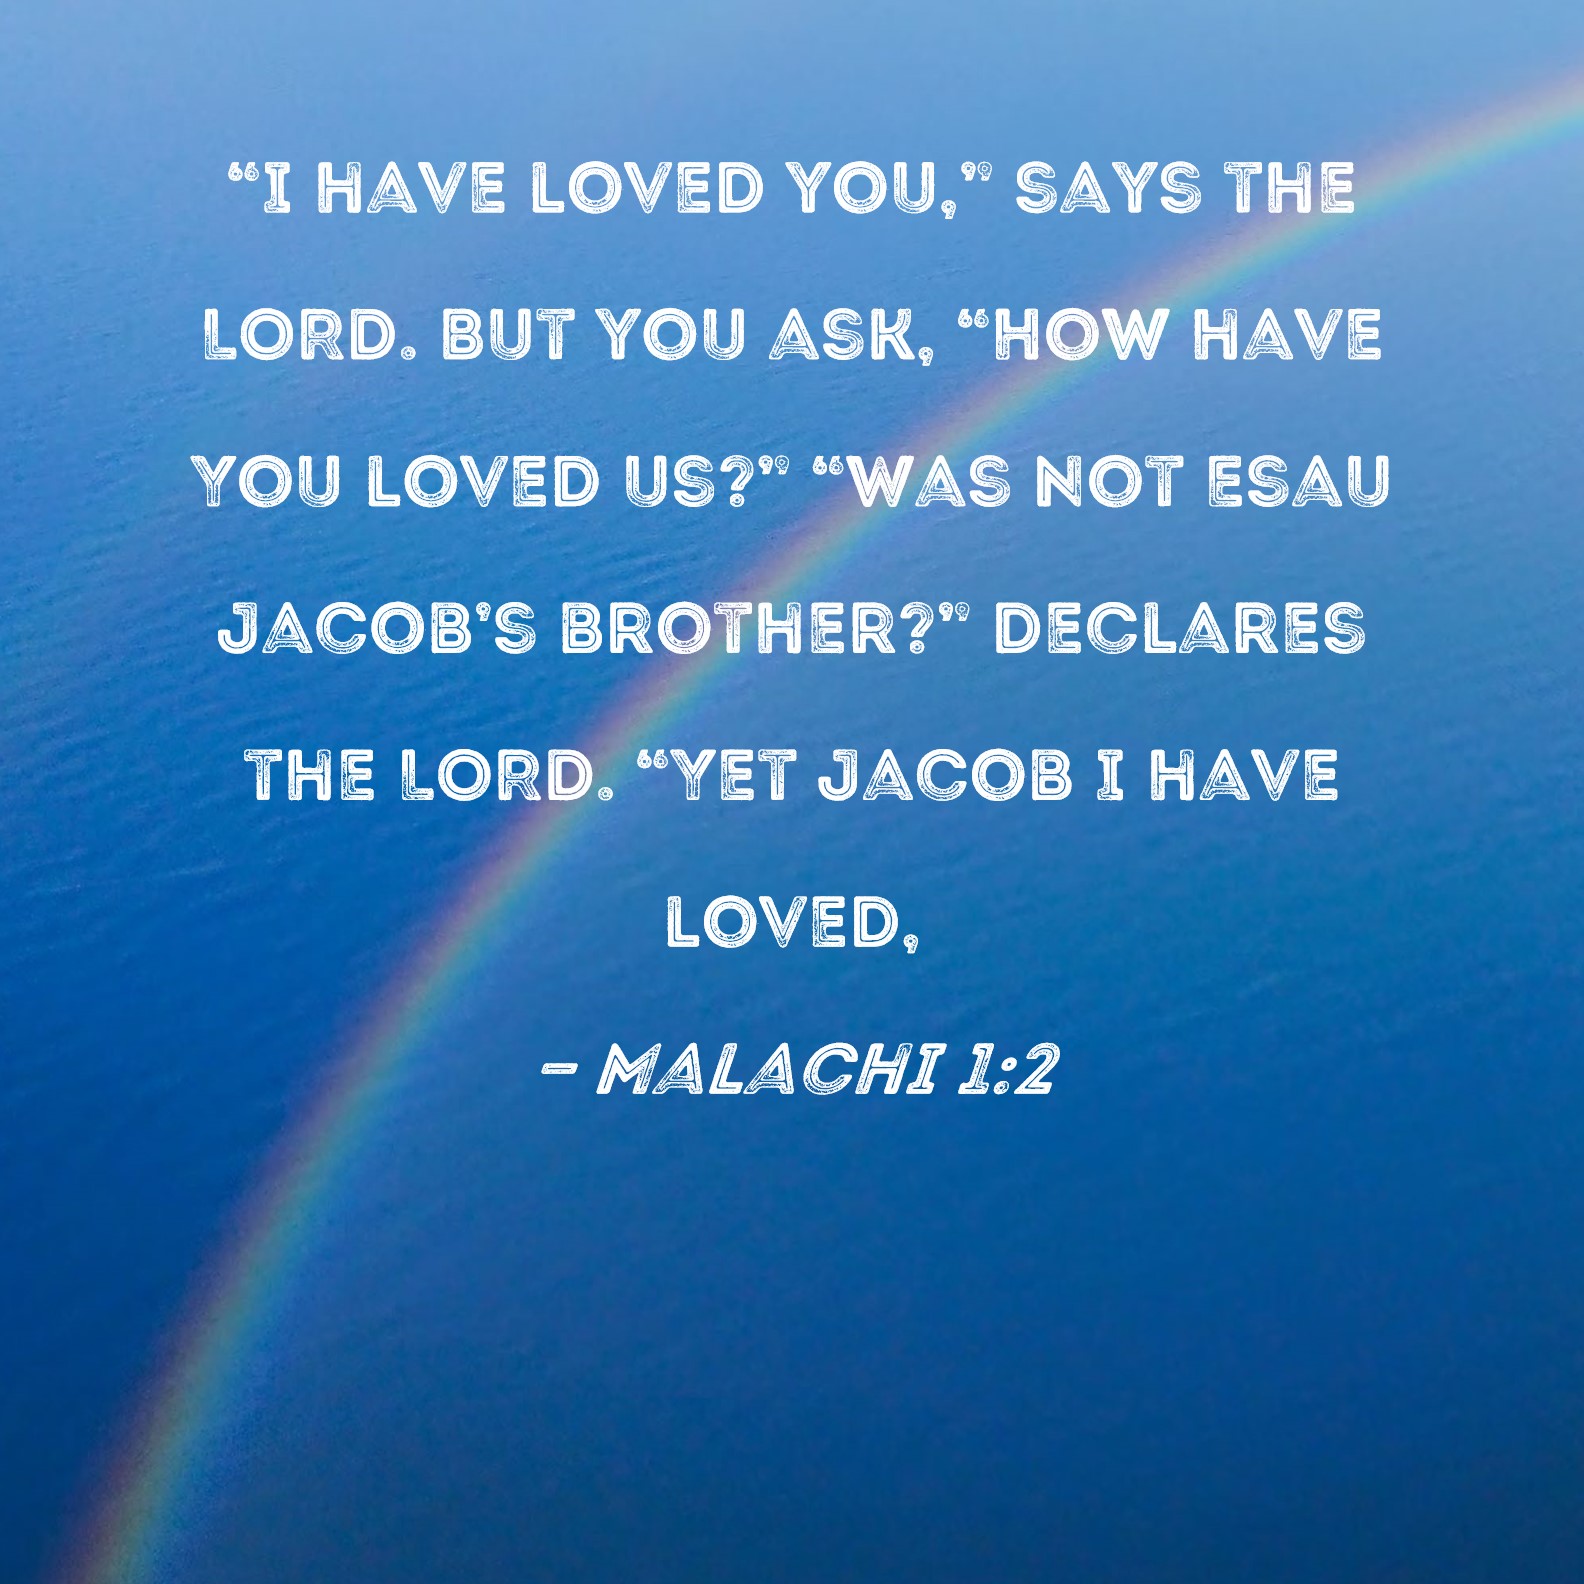 malachi-1-2-i-have-loved-you-says-the-lord-but-you-ask-how-have